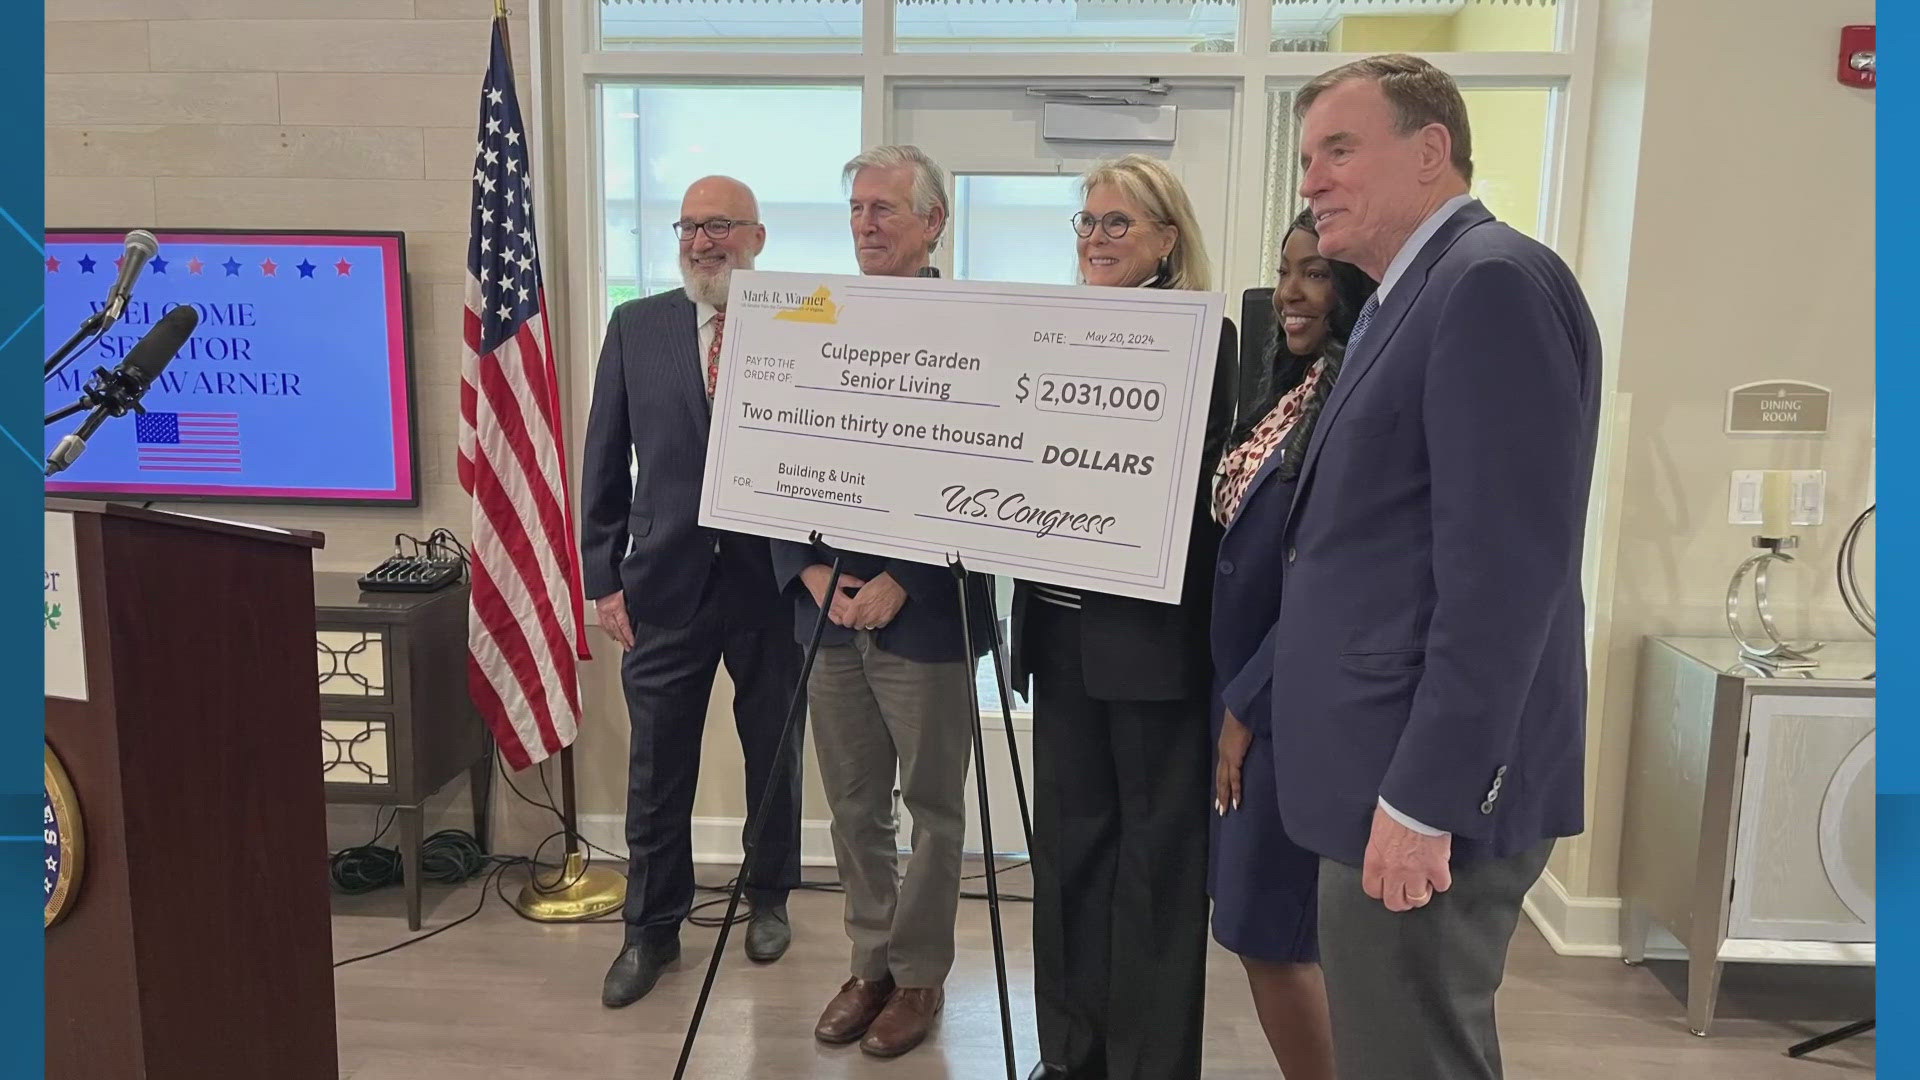 The senior living center in Arlington serves hundreds of at-risk older adults who live on very low and fixed incomes. The money will go towards upgrades.